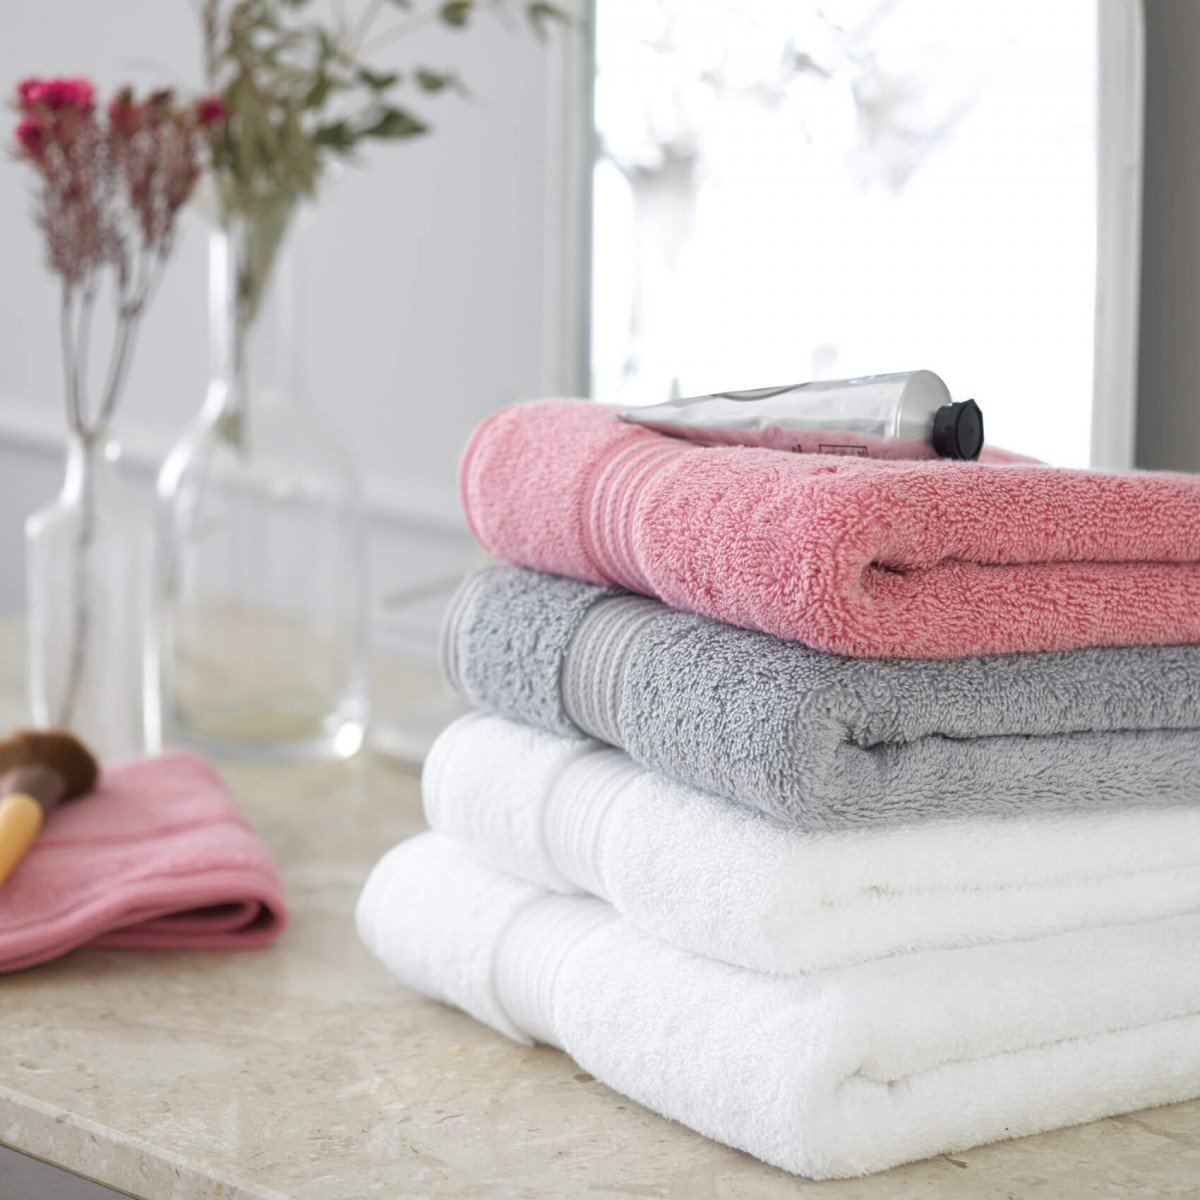 Towel Sets  Shop Exclusive Cotton Terry Hotel Towels From Sofitel